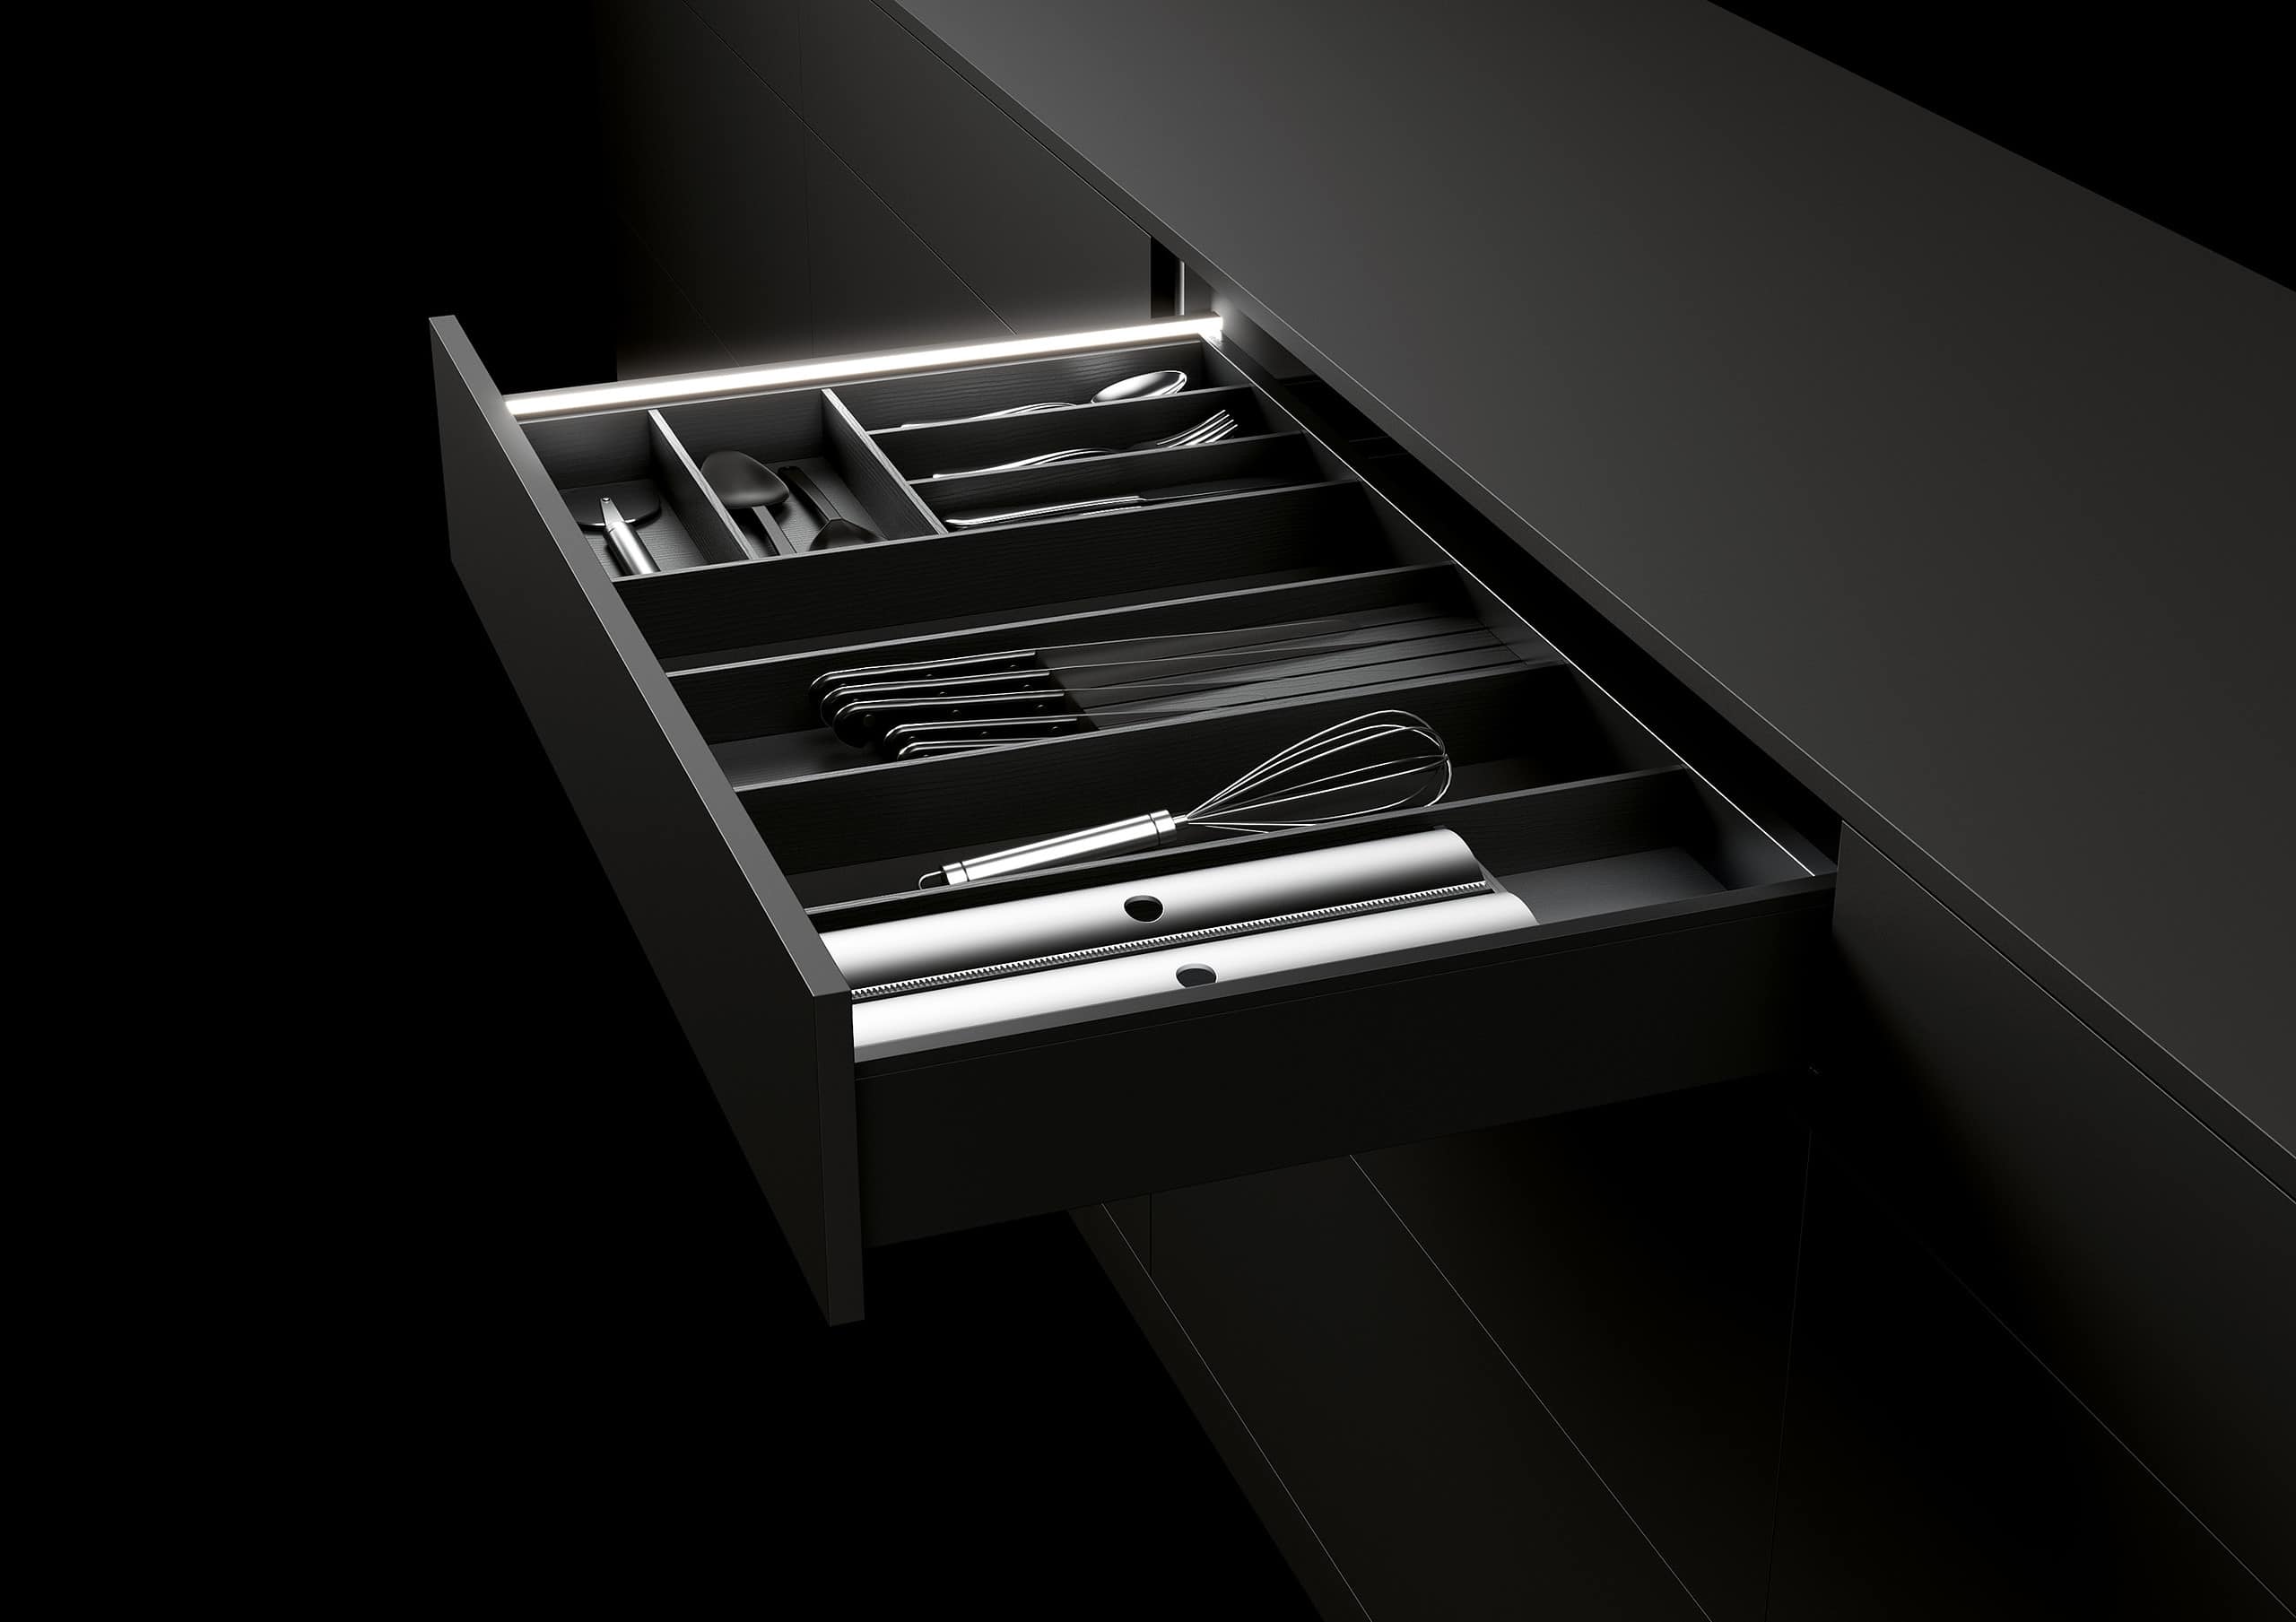 Cutlery and utensil tray